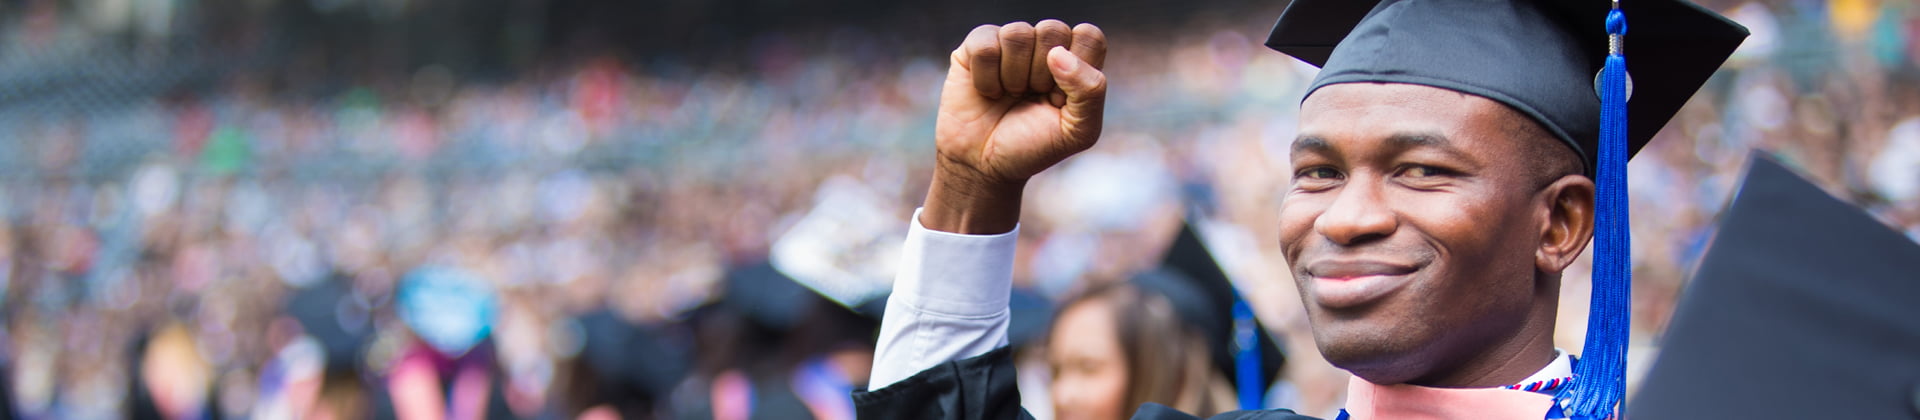 A graduate from NU holds his fist in the air at the graduation ceremony